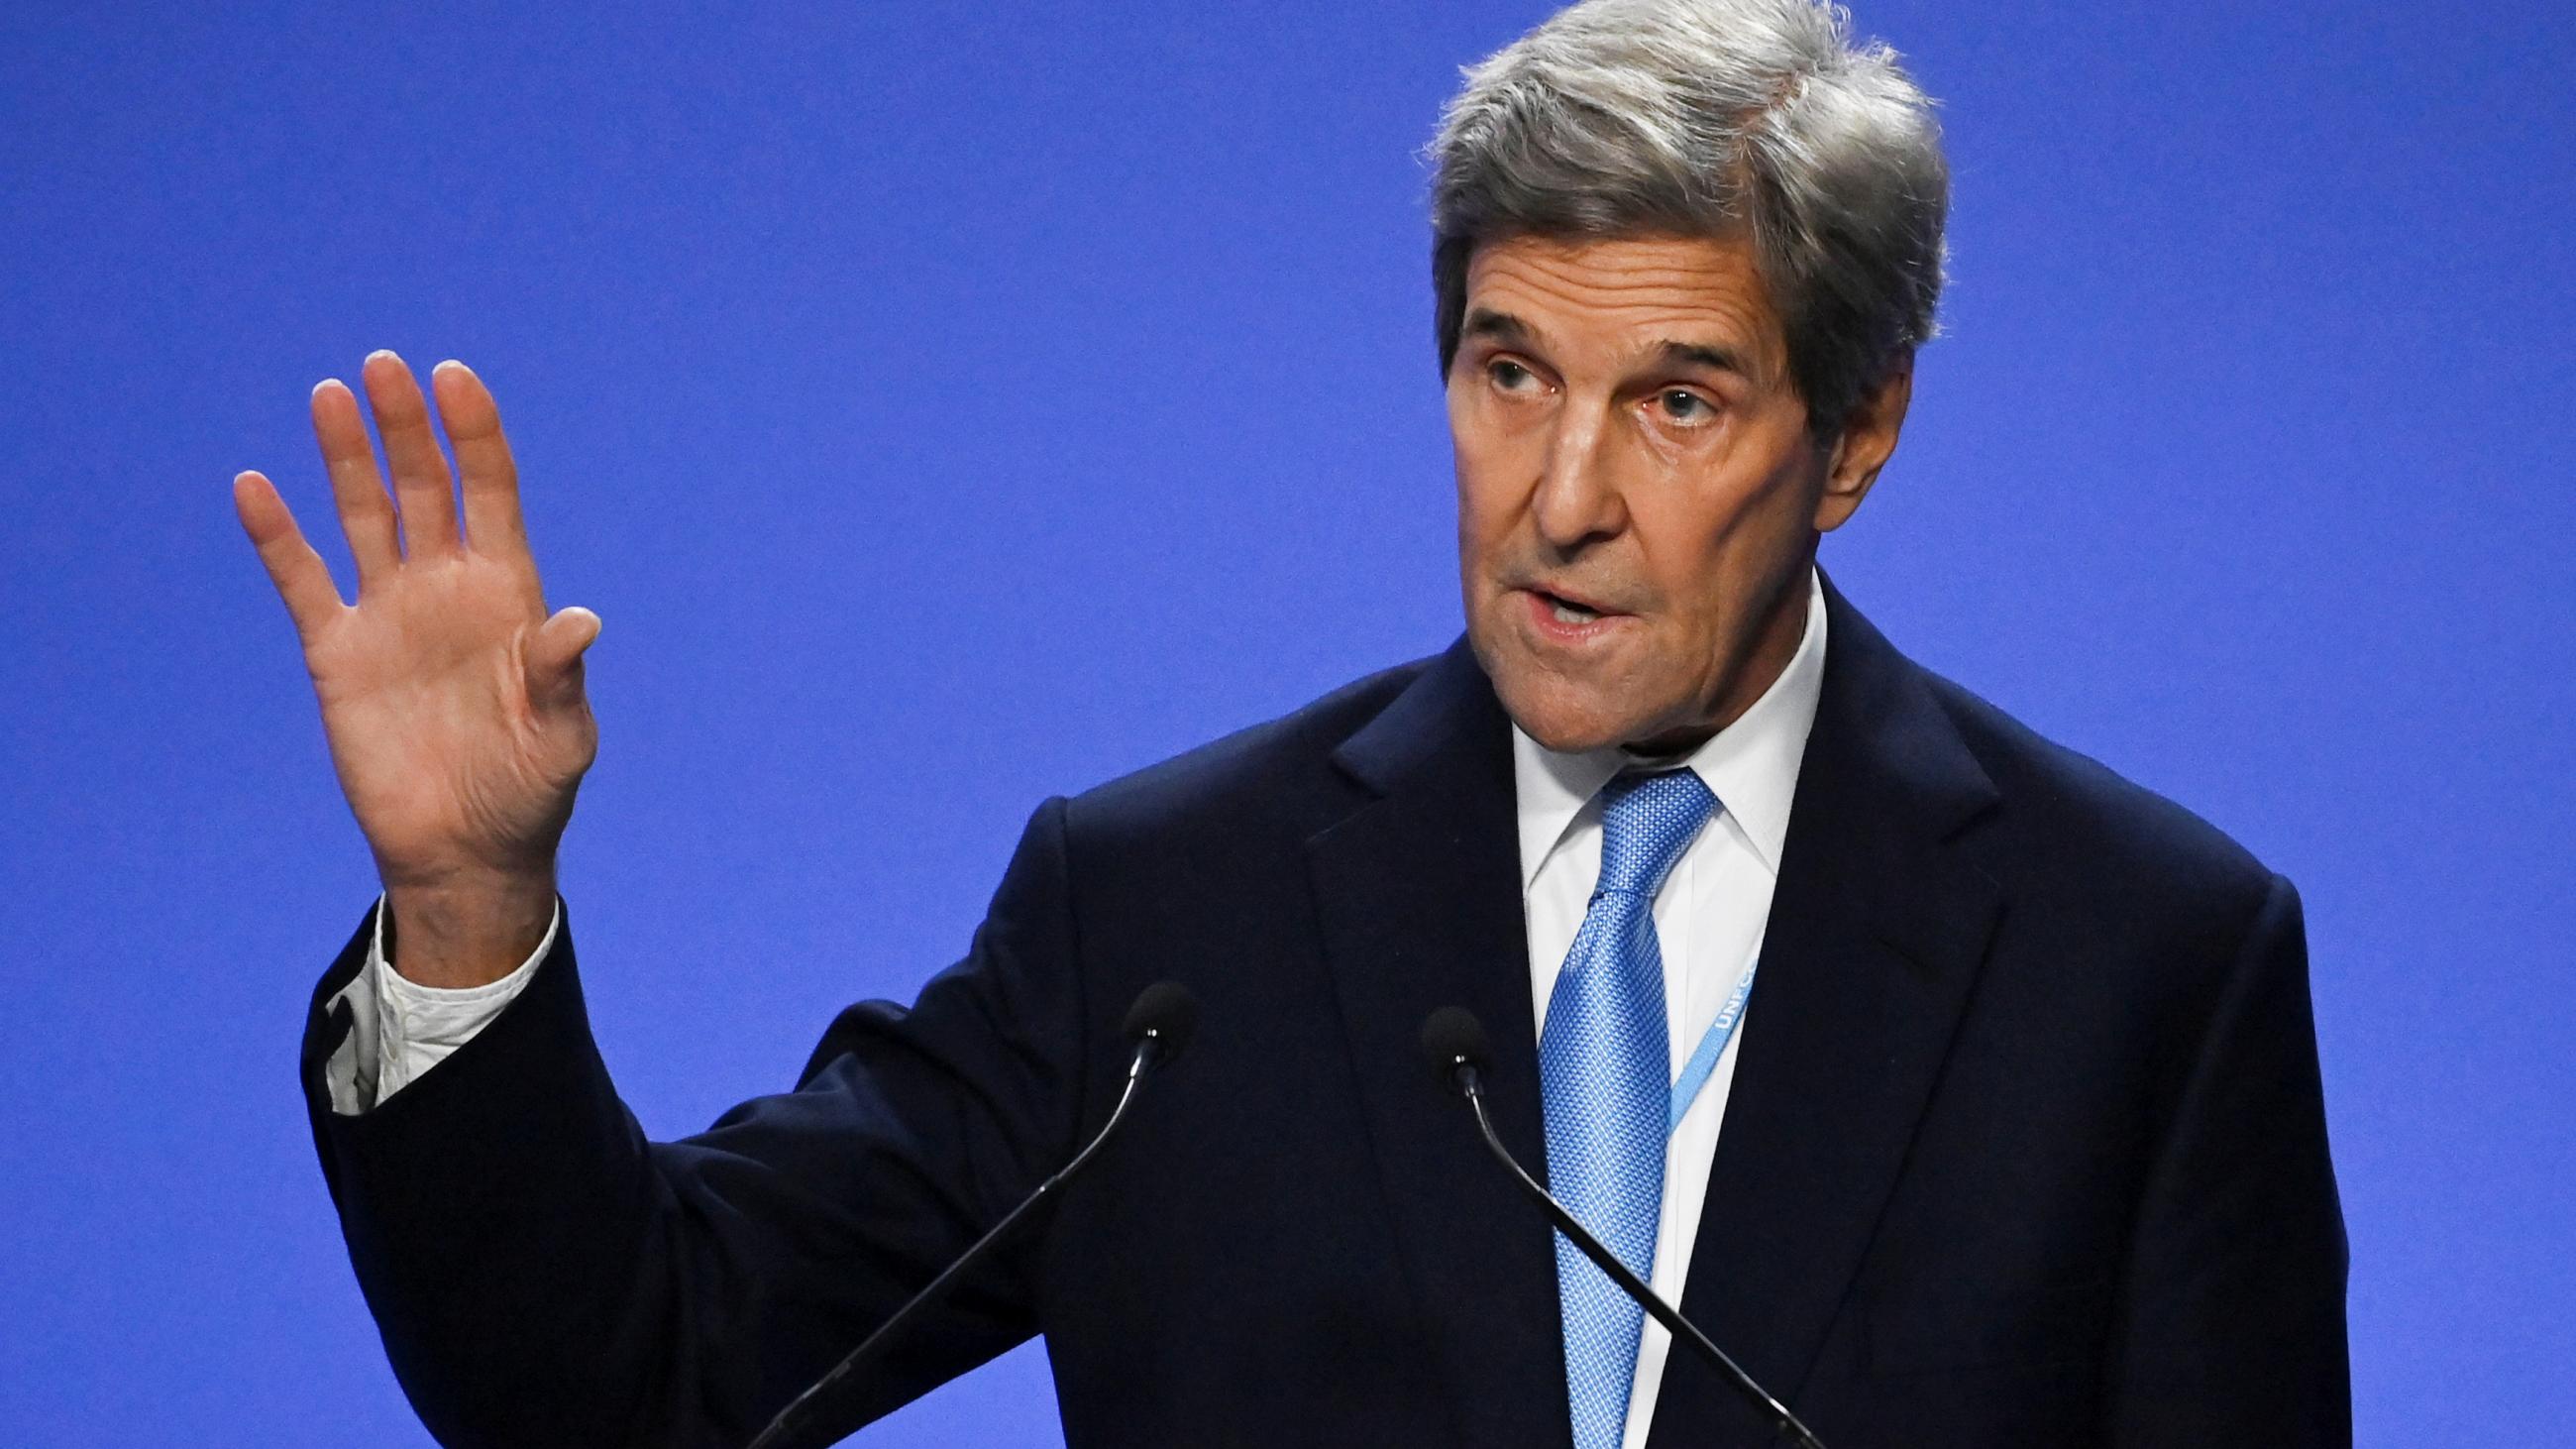 U.S. climate envoy John Kerry discusses a joint China and United States agreement on climate action during the second week of the conference.